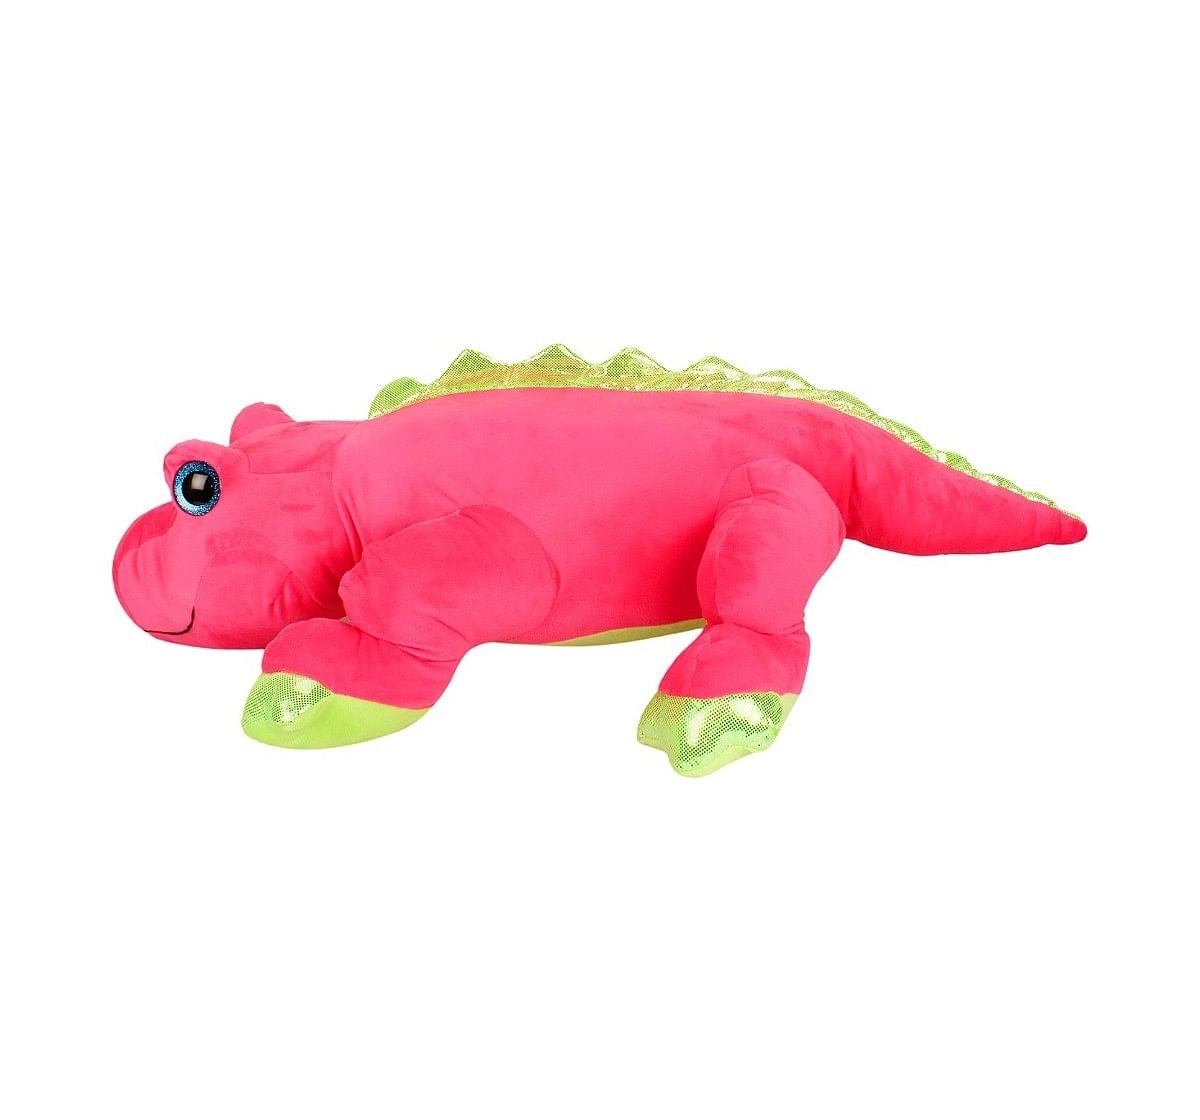 Fuzzbuzz Pink Stuffed Alligator - 76Cm Quirky Soft Toys for Kids age 0M+ - 23 Cm (Pink)